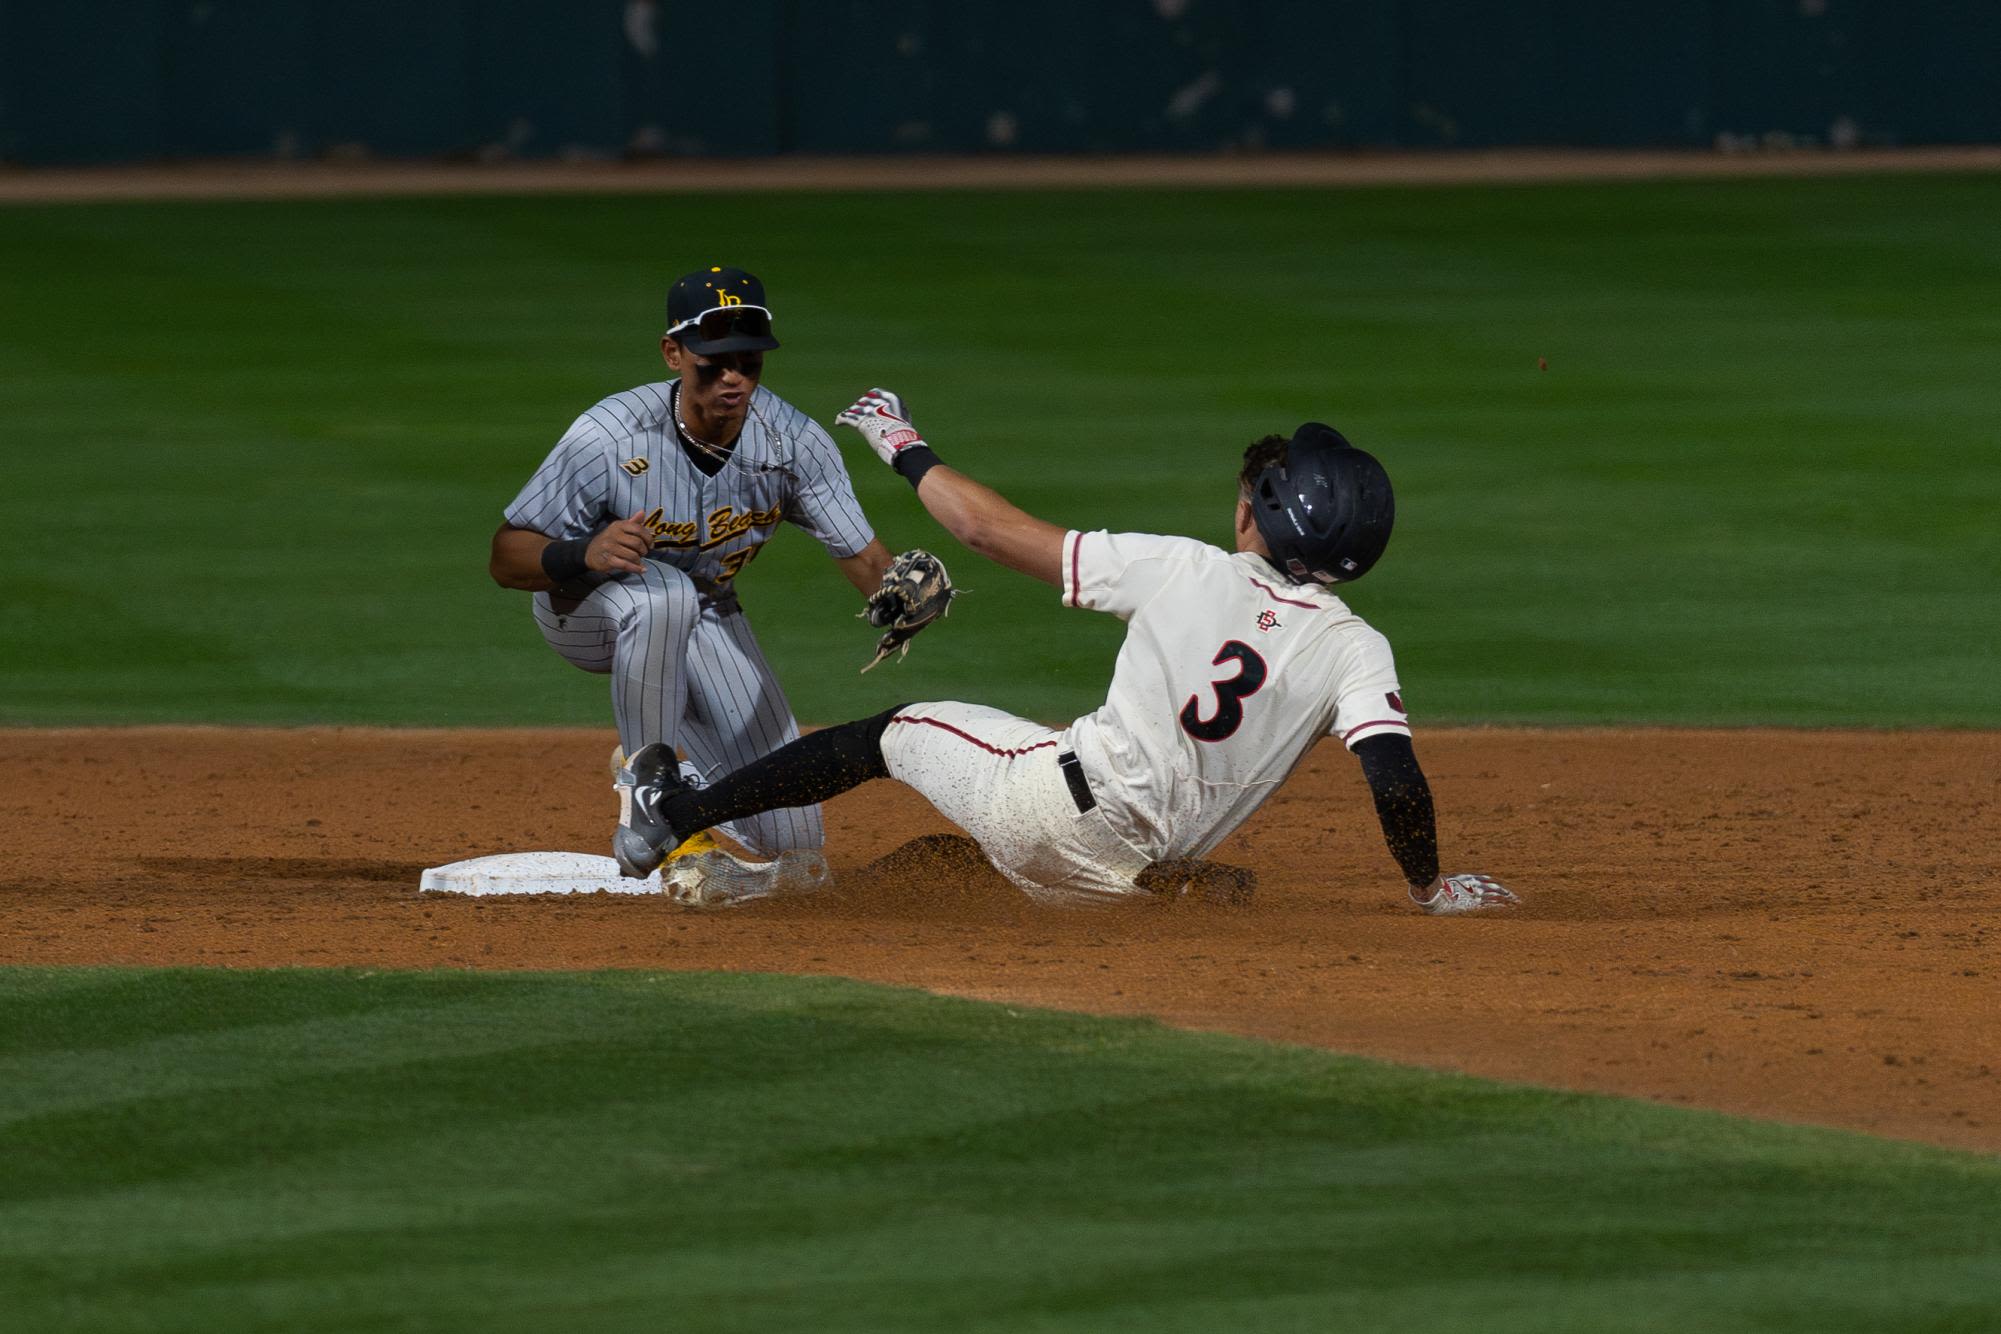 Aztecs drop ninth straight in walk-off fashion to the New Mexico Lobos 9-7